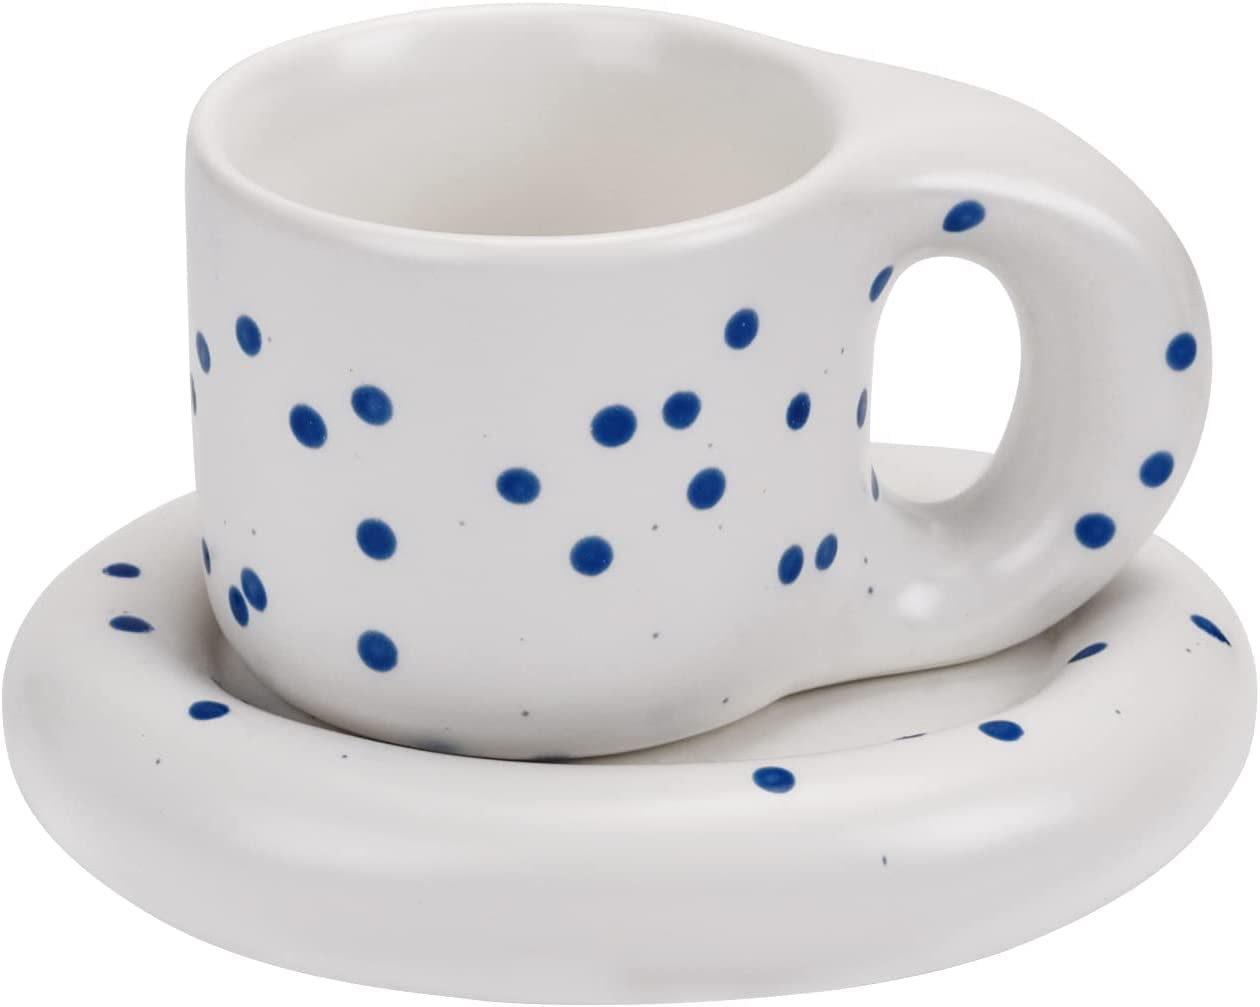 Danceemangoos Ceramic Coffee Mug, Creative Cute Round Handle Cup with Saucer for Office and Home, Dishwasher and Microwave Safe, 8.5 oz/250 ml for